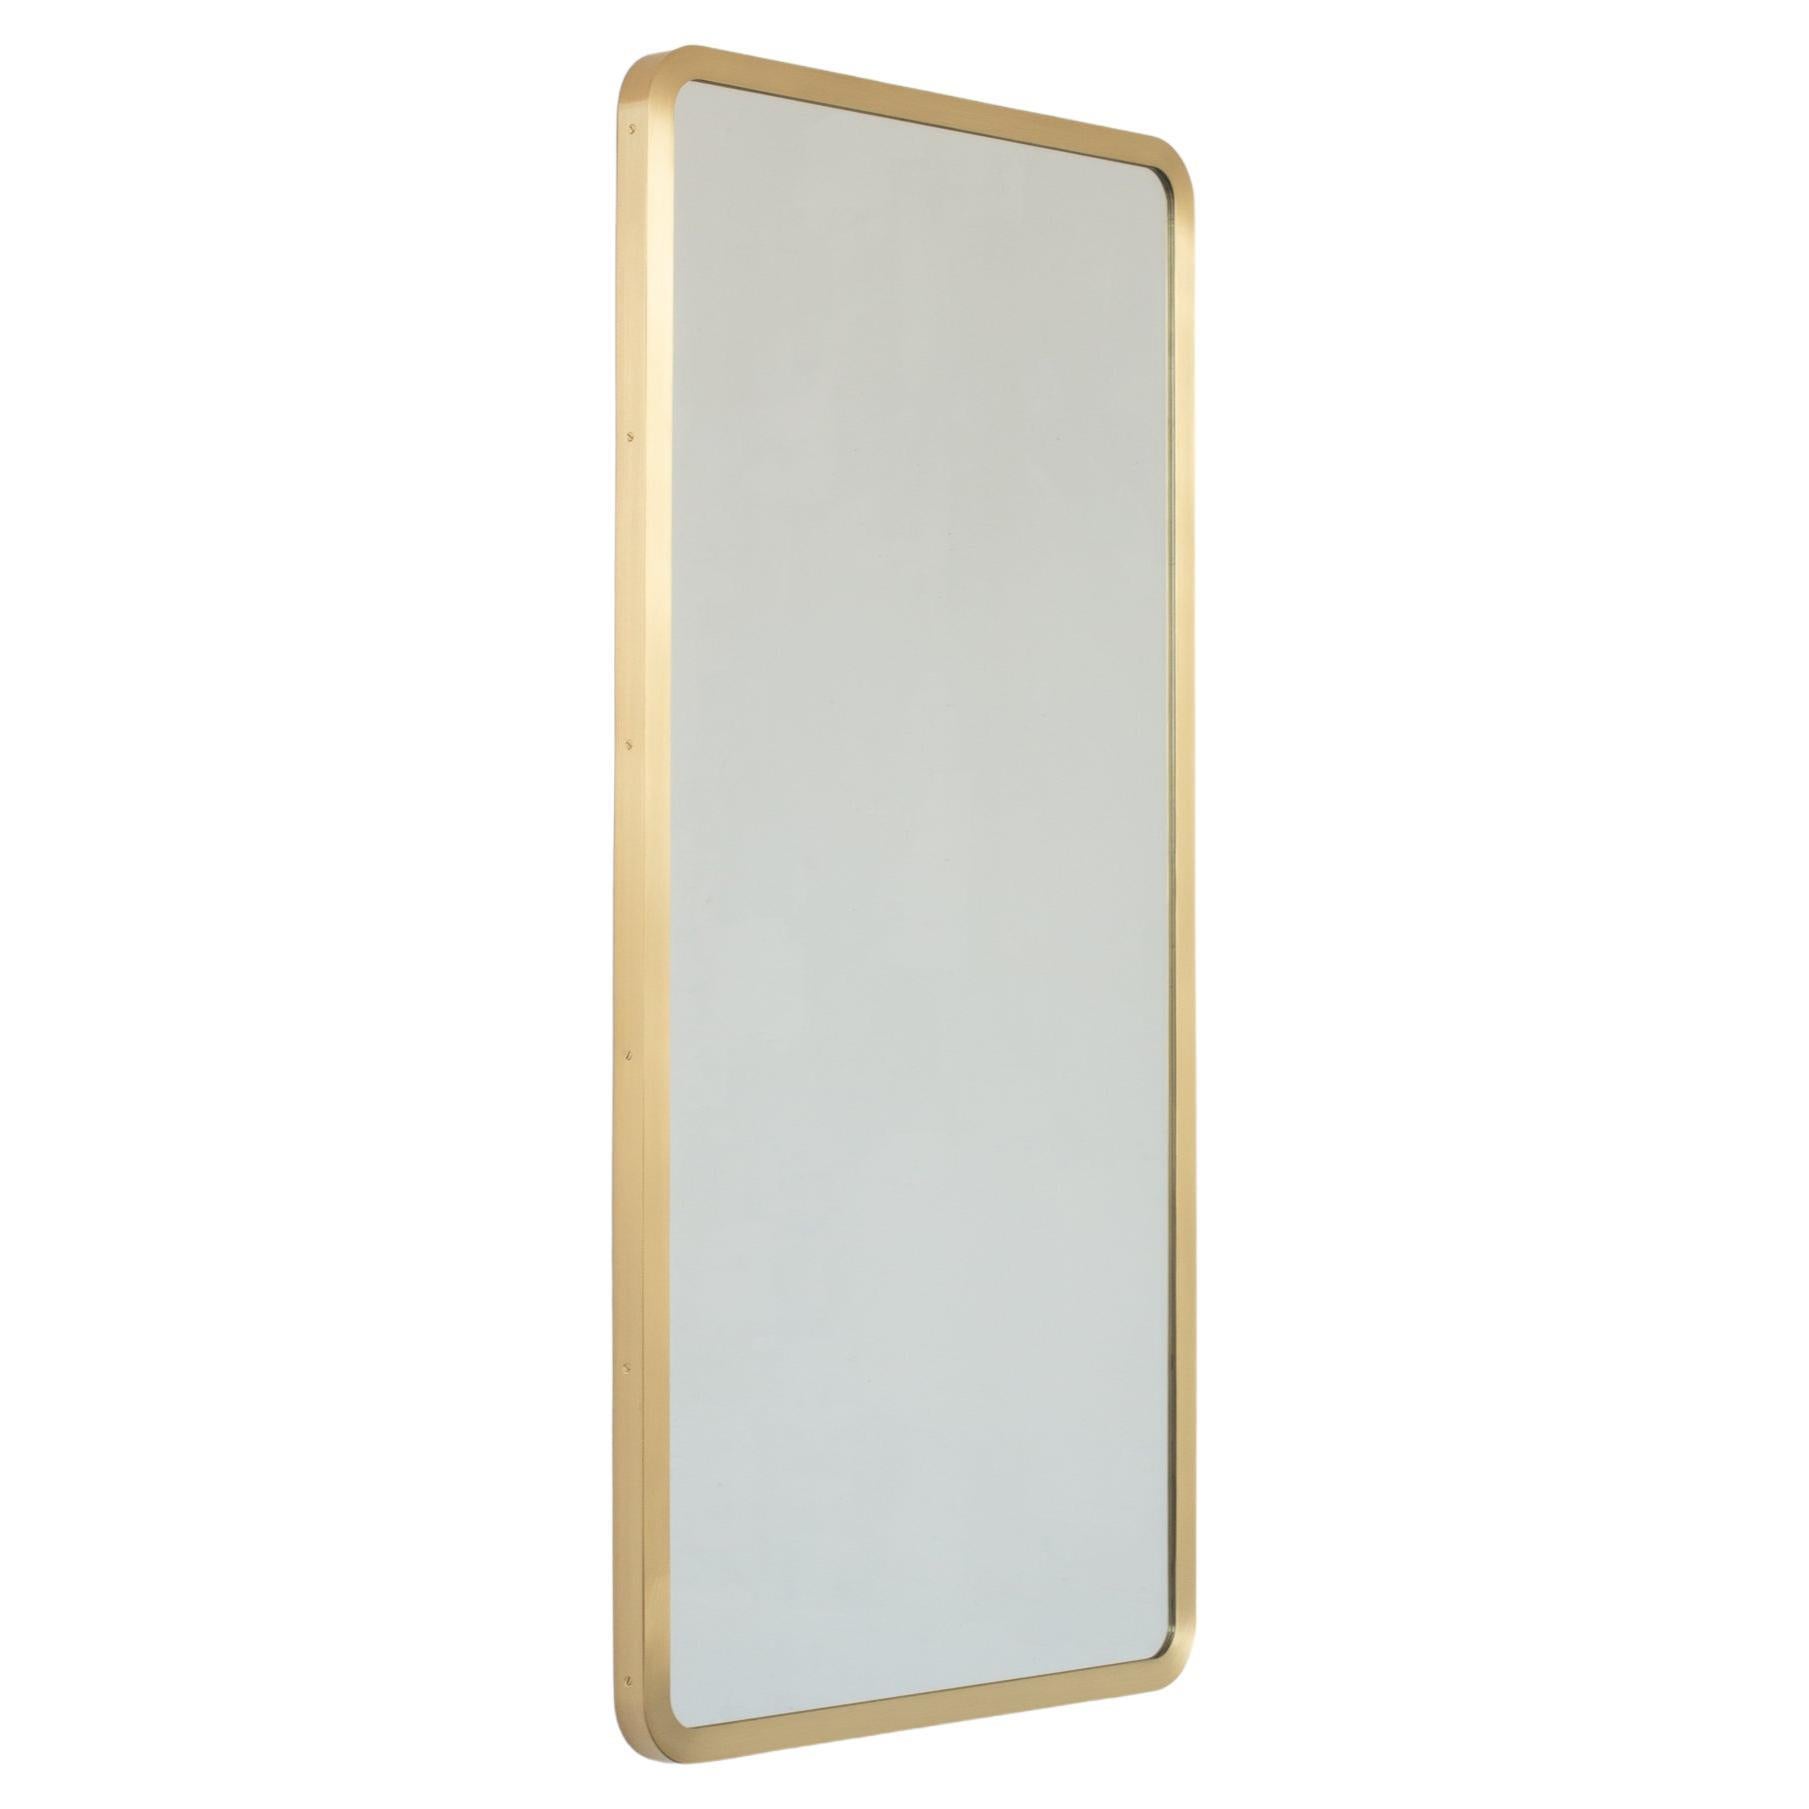 Quadris Rectangular Contemporary Mirror with a Full Front Brass Frame, Medium For Sale